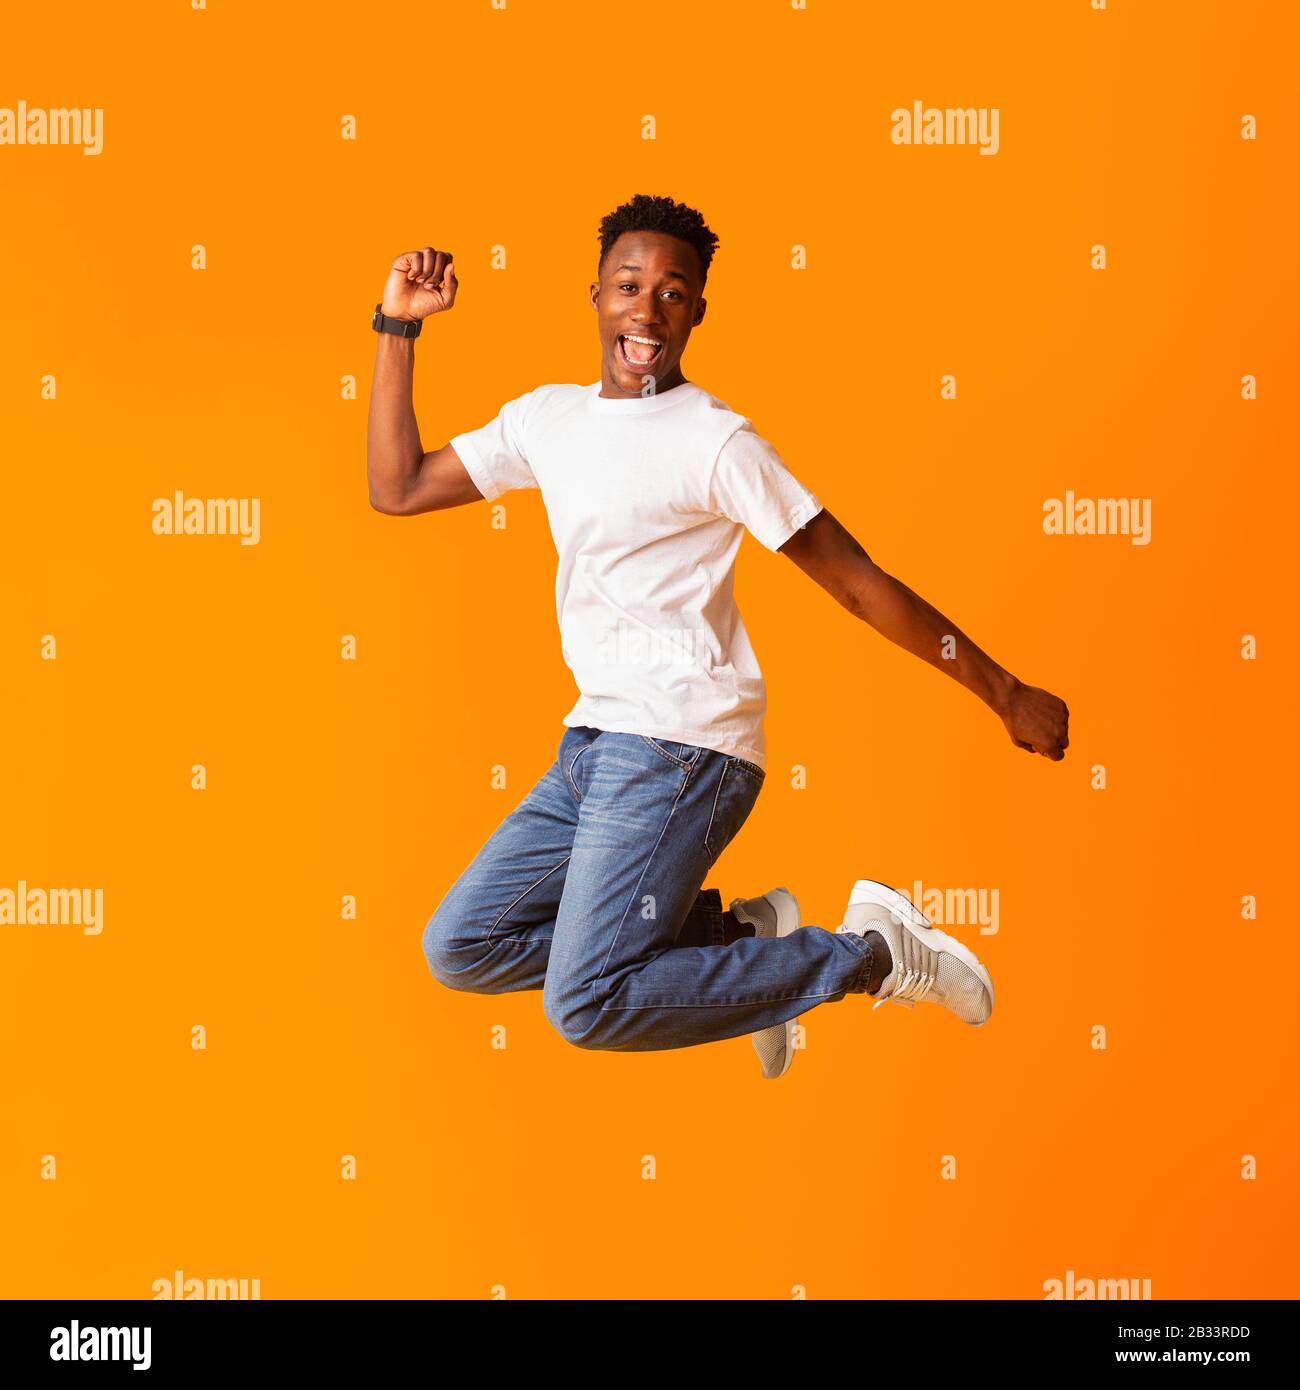 Excited screaming african man jumping while celebrating Stock Photo